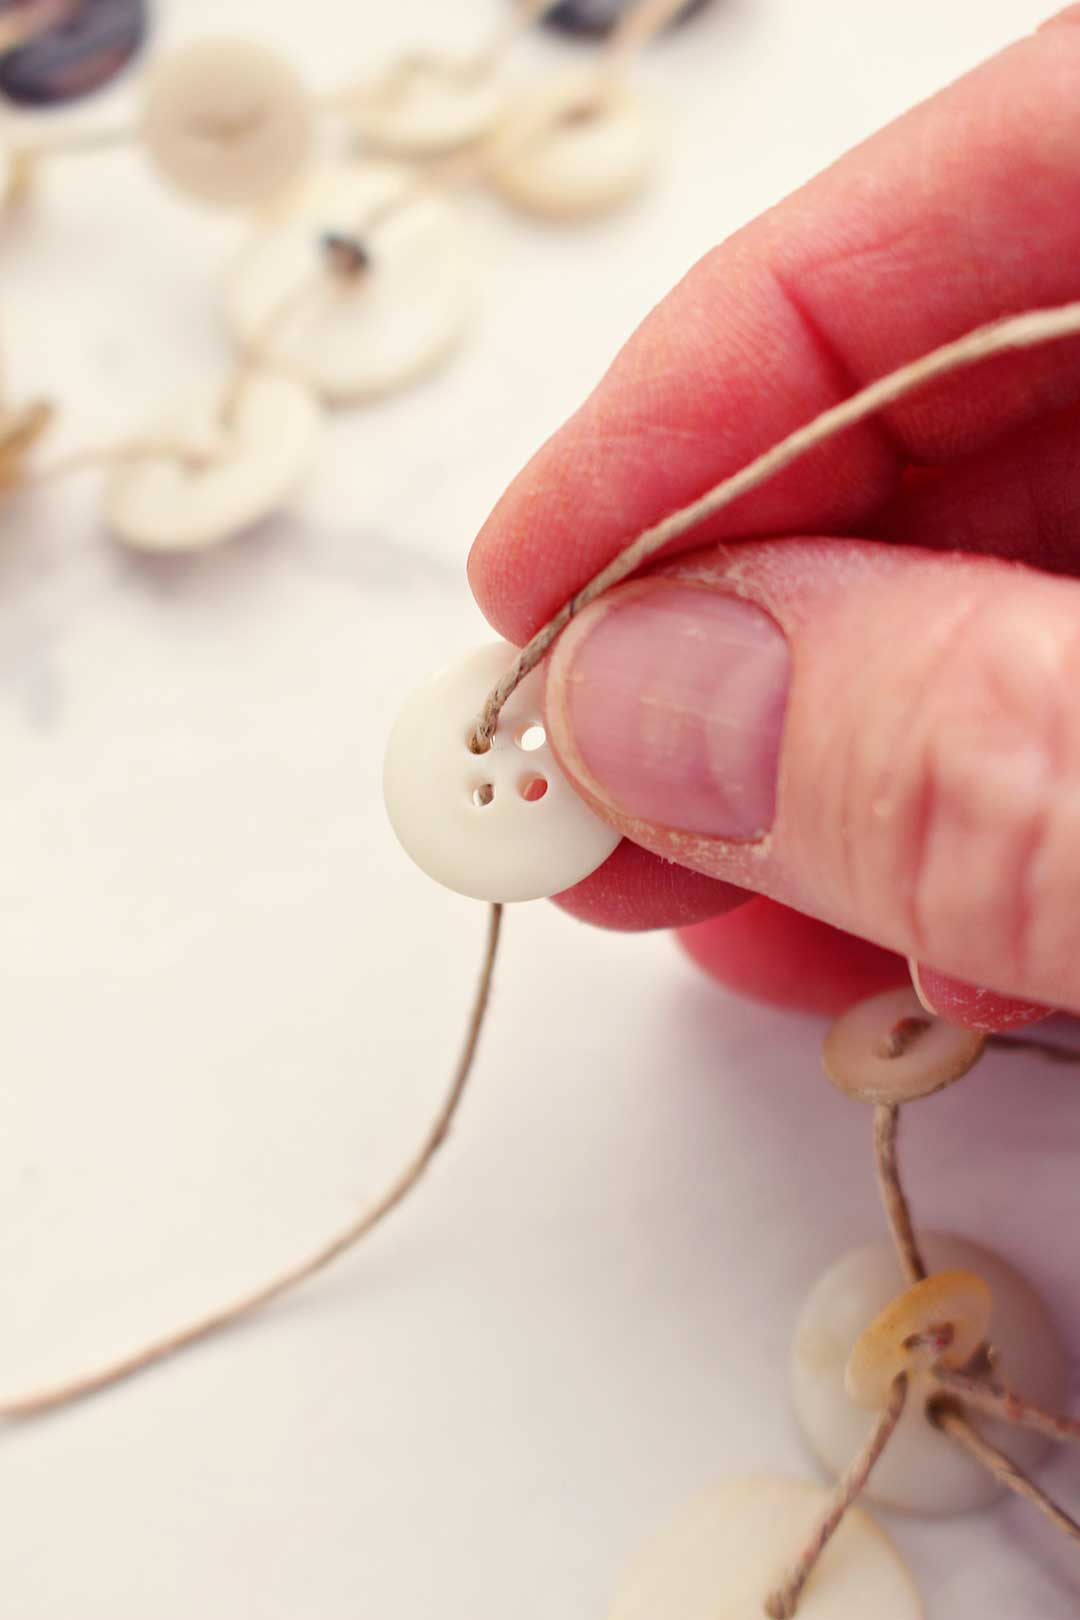 Hand stringing white button on a piece of string.